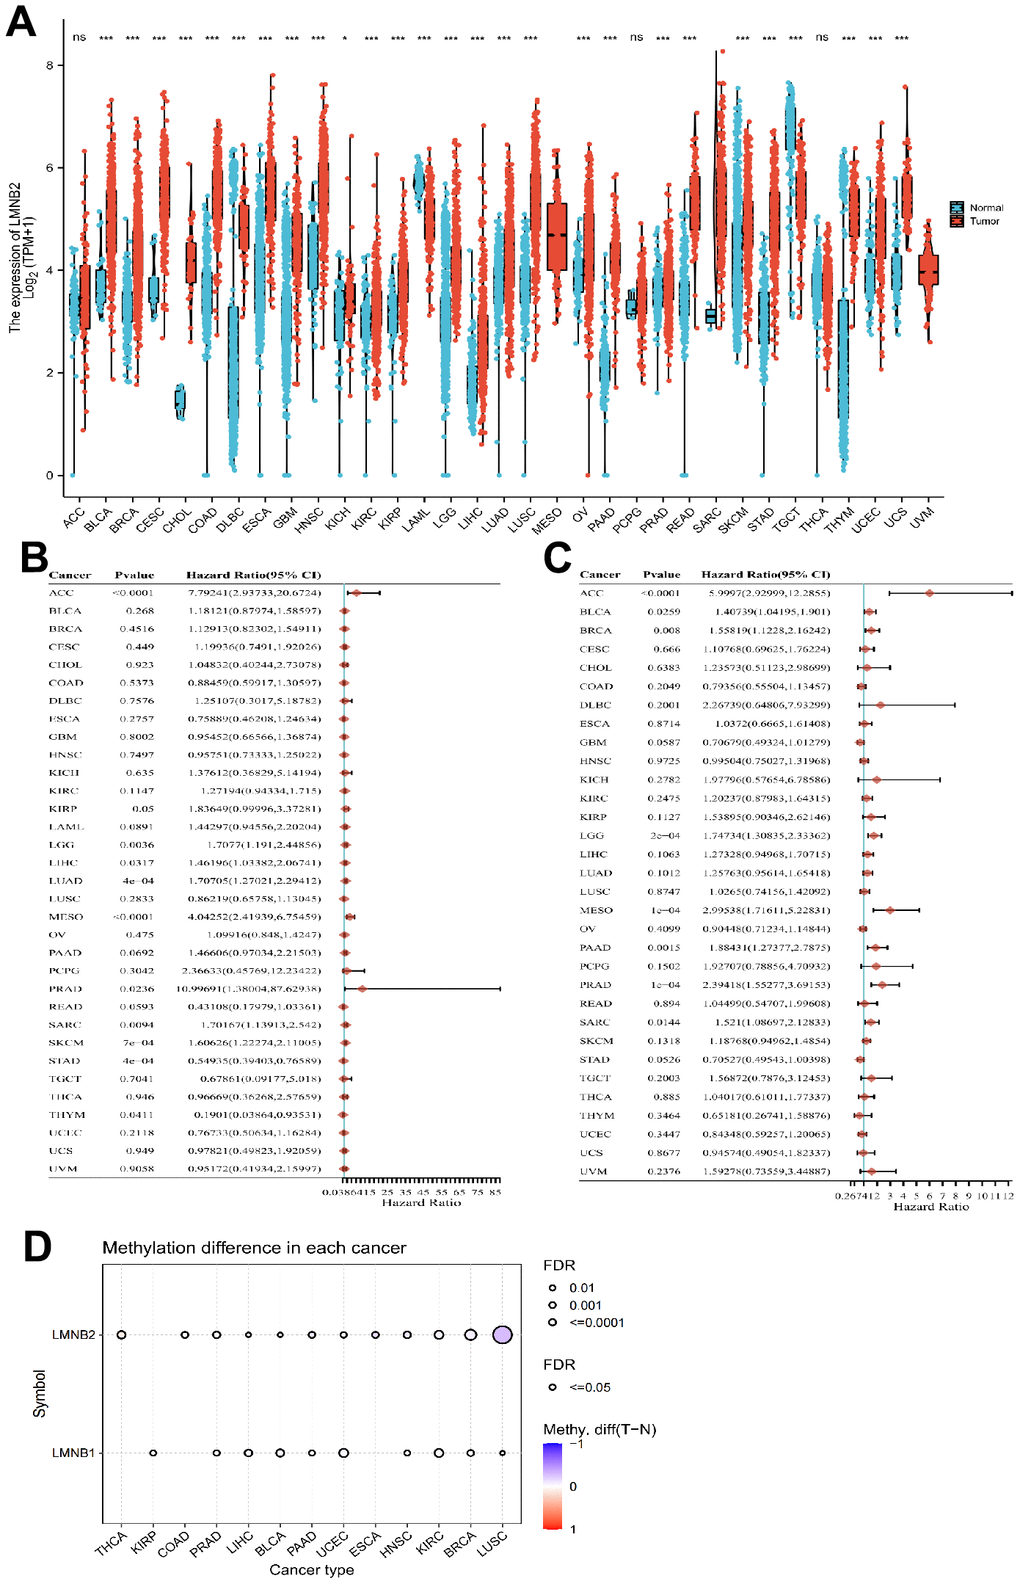 Comprehensive analysis of LMNB2 in pan-cancers. (A) LMNB2 expression levels in different cancers from the TCGA database were demonstrated (** PB) Forest plot shows the univariate Cox regression analysis results for LMNB2 to predict the OS in pan-cancers from the TCGA database. (C) A Forest plot shows the univariate Cox regression analysis results for LMNB2 to predict PFS in pan-cancers from the TCGA database. (D) The methylation status of LMNB2 in pan-cancer was demonstrated.